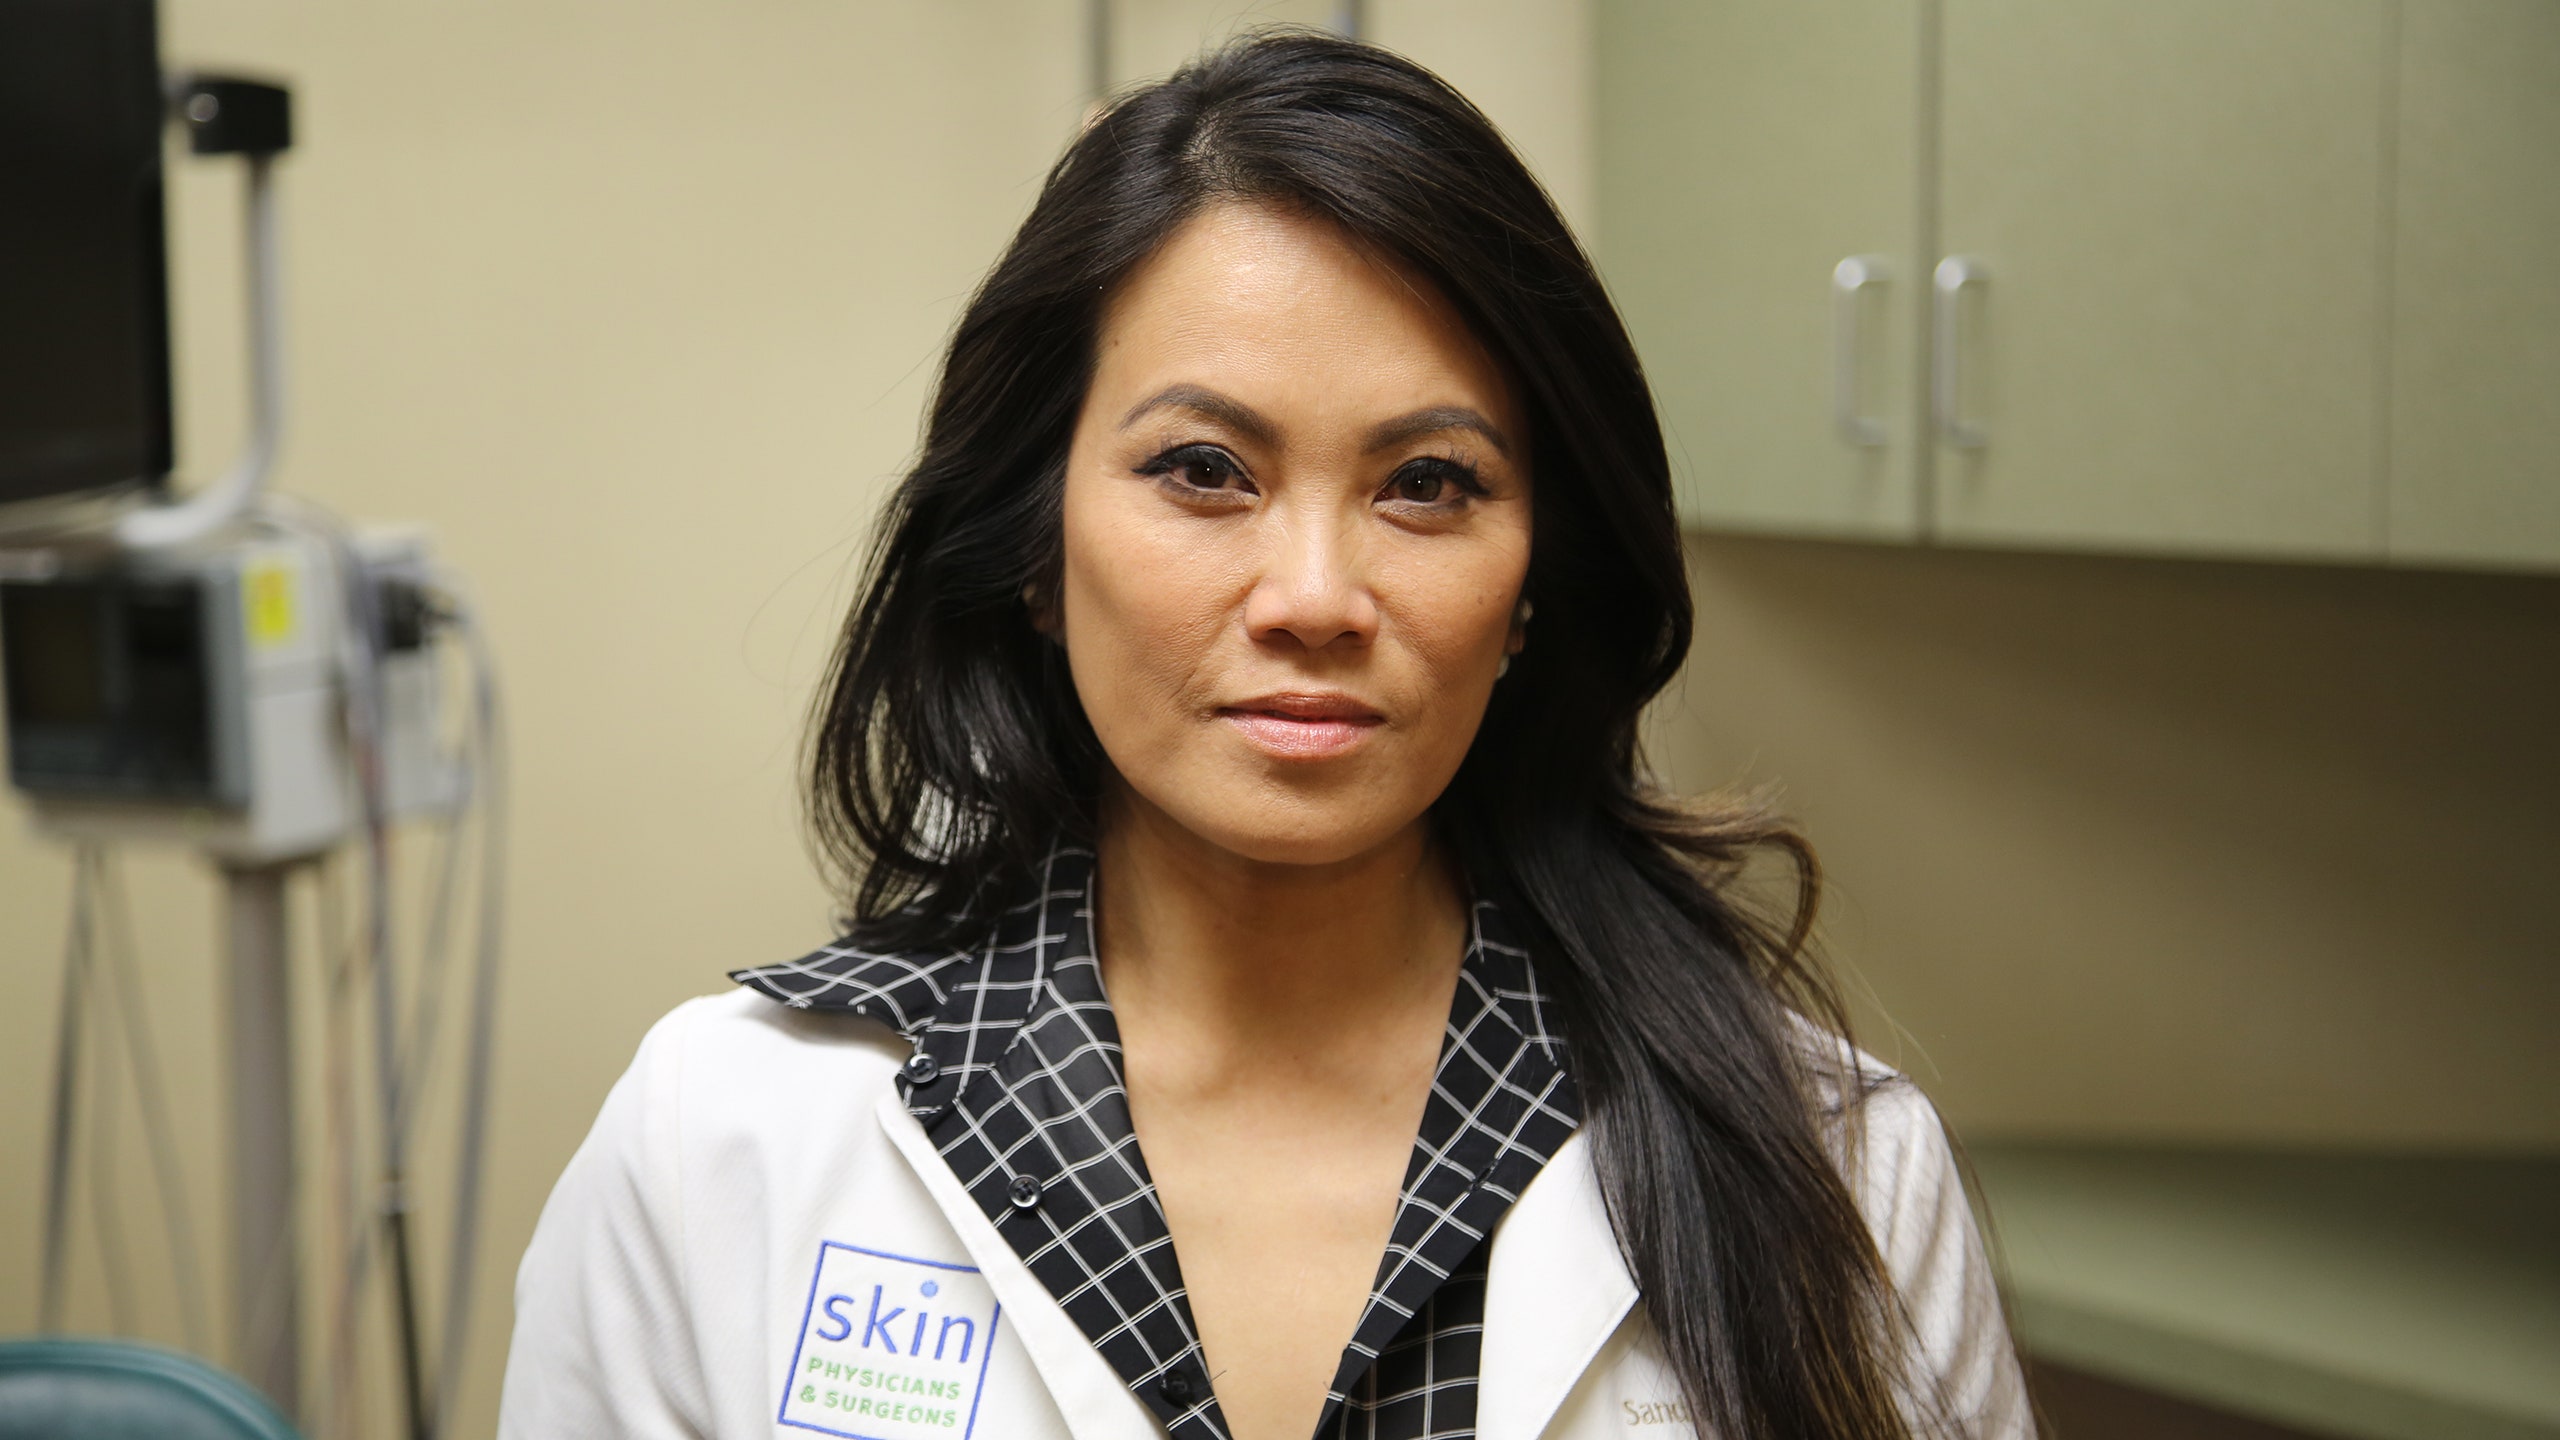 Dr. Pimple Popper Net Worth What is Dr. Sandra Lee's Net Worth?